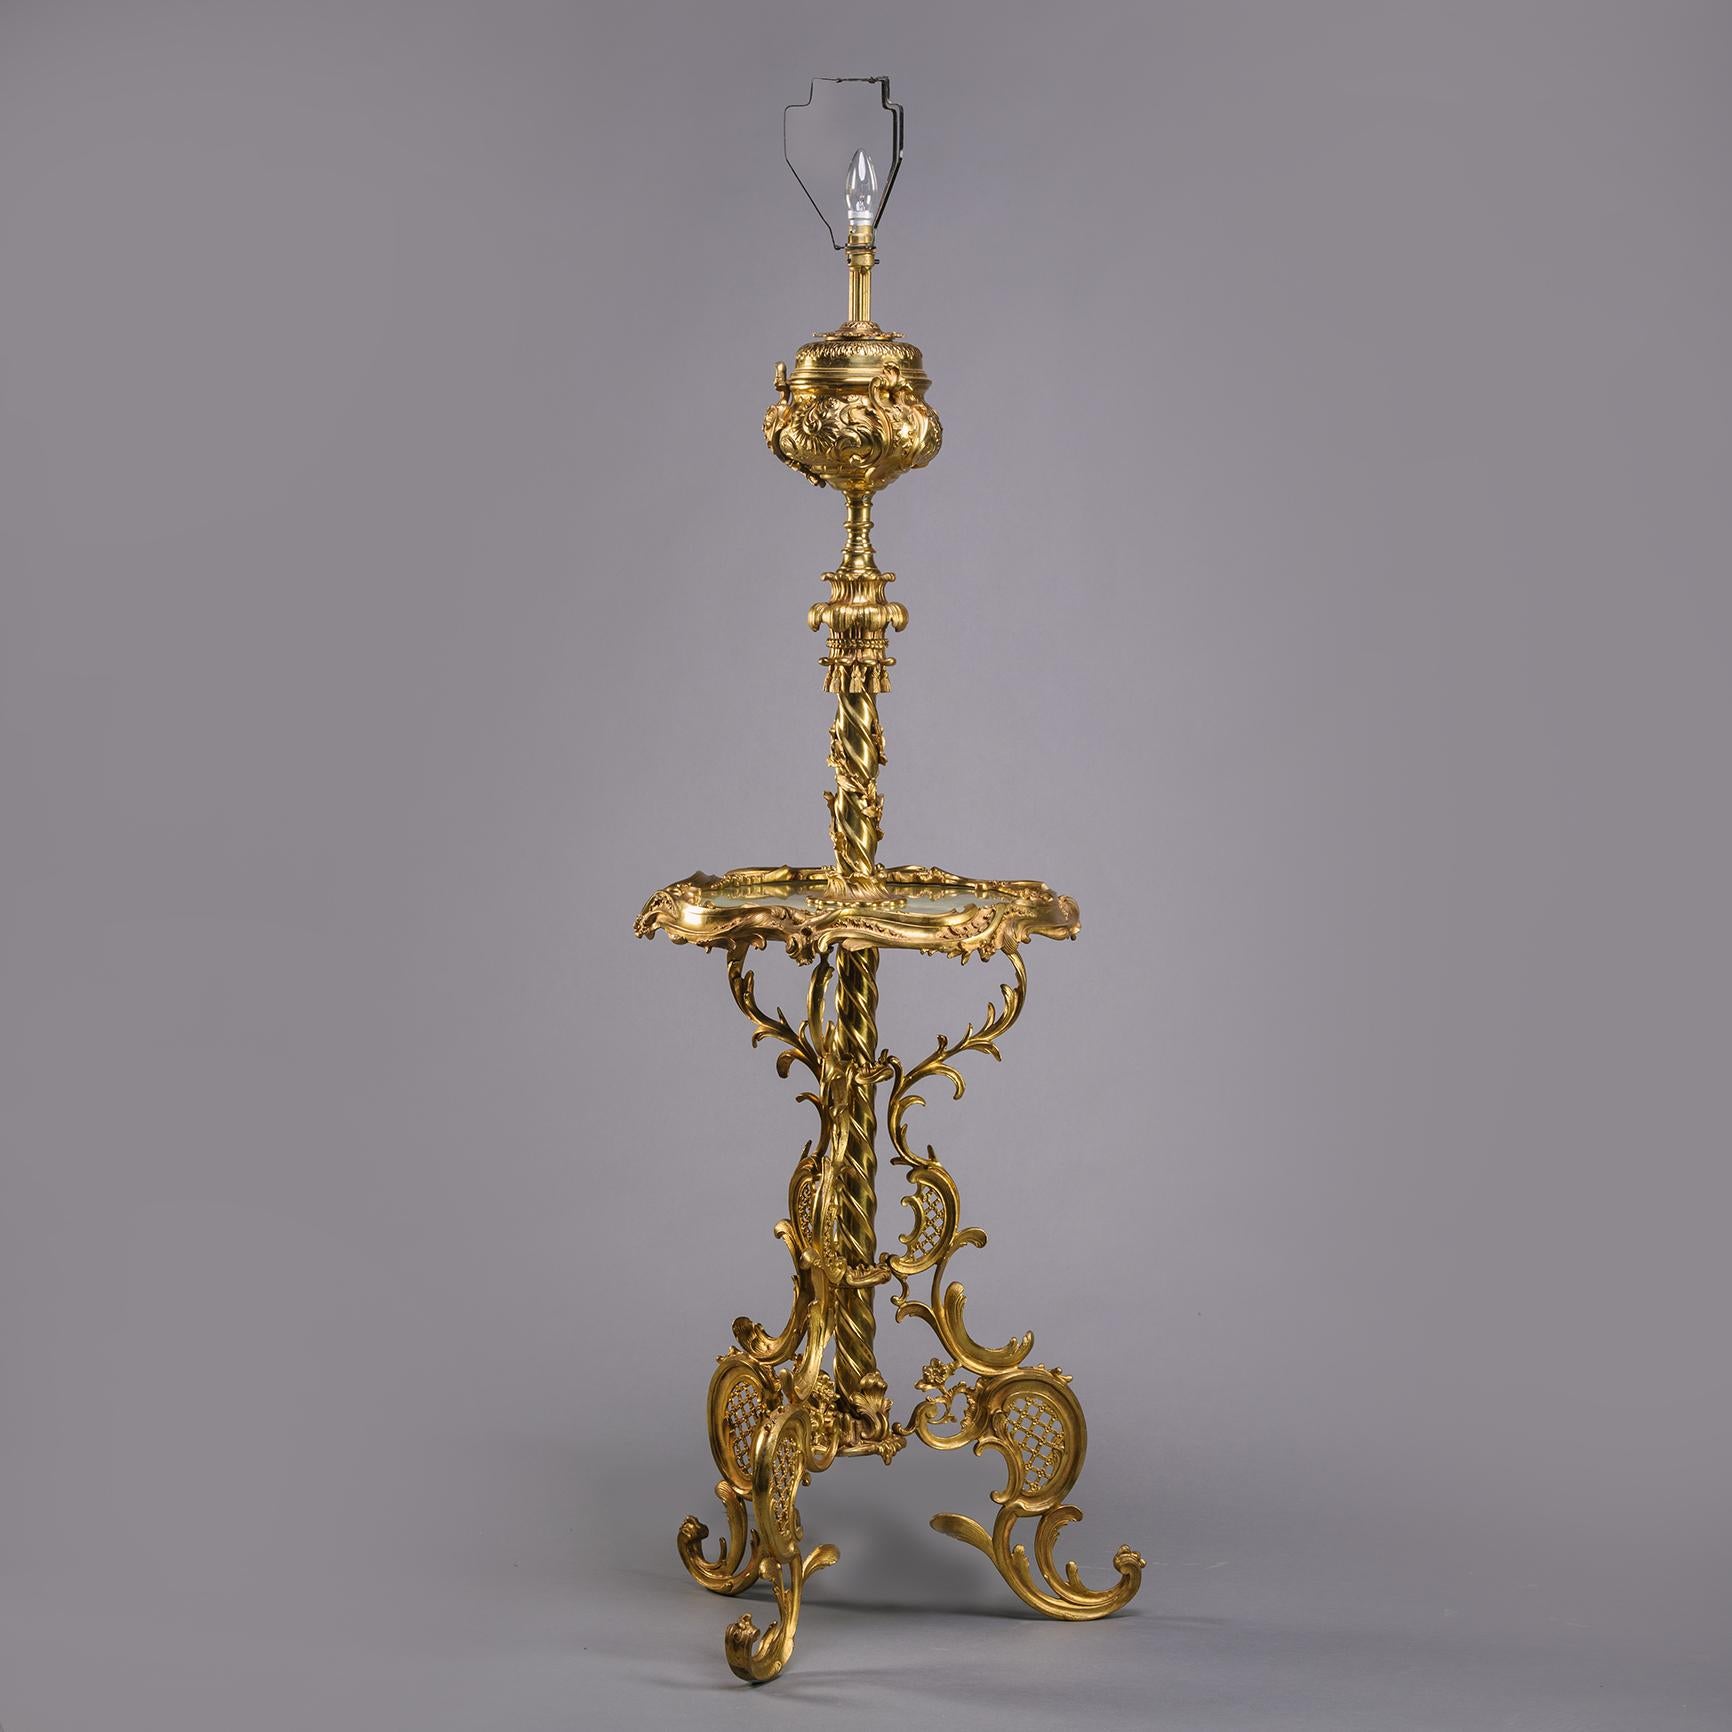 An Edwardian Gilt-Bronze Standard Lamp Tier Table.

Designed in the rococo style with spirally fluted stem supporting an urn with bulb fitment above. The central tier with green onyx top. Supporting on three 'C'-scroll legs.

England, Circa 1910.